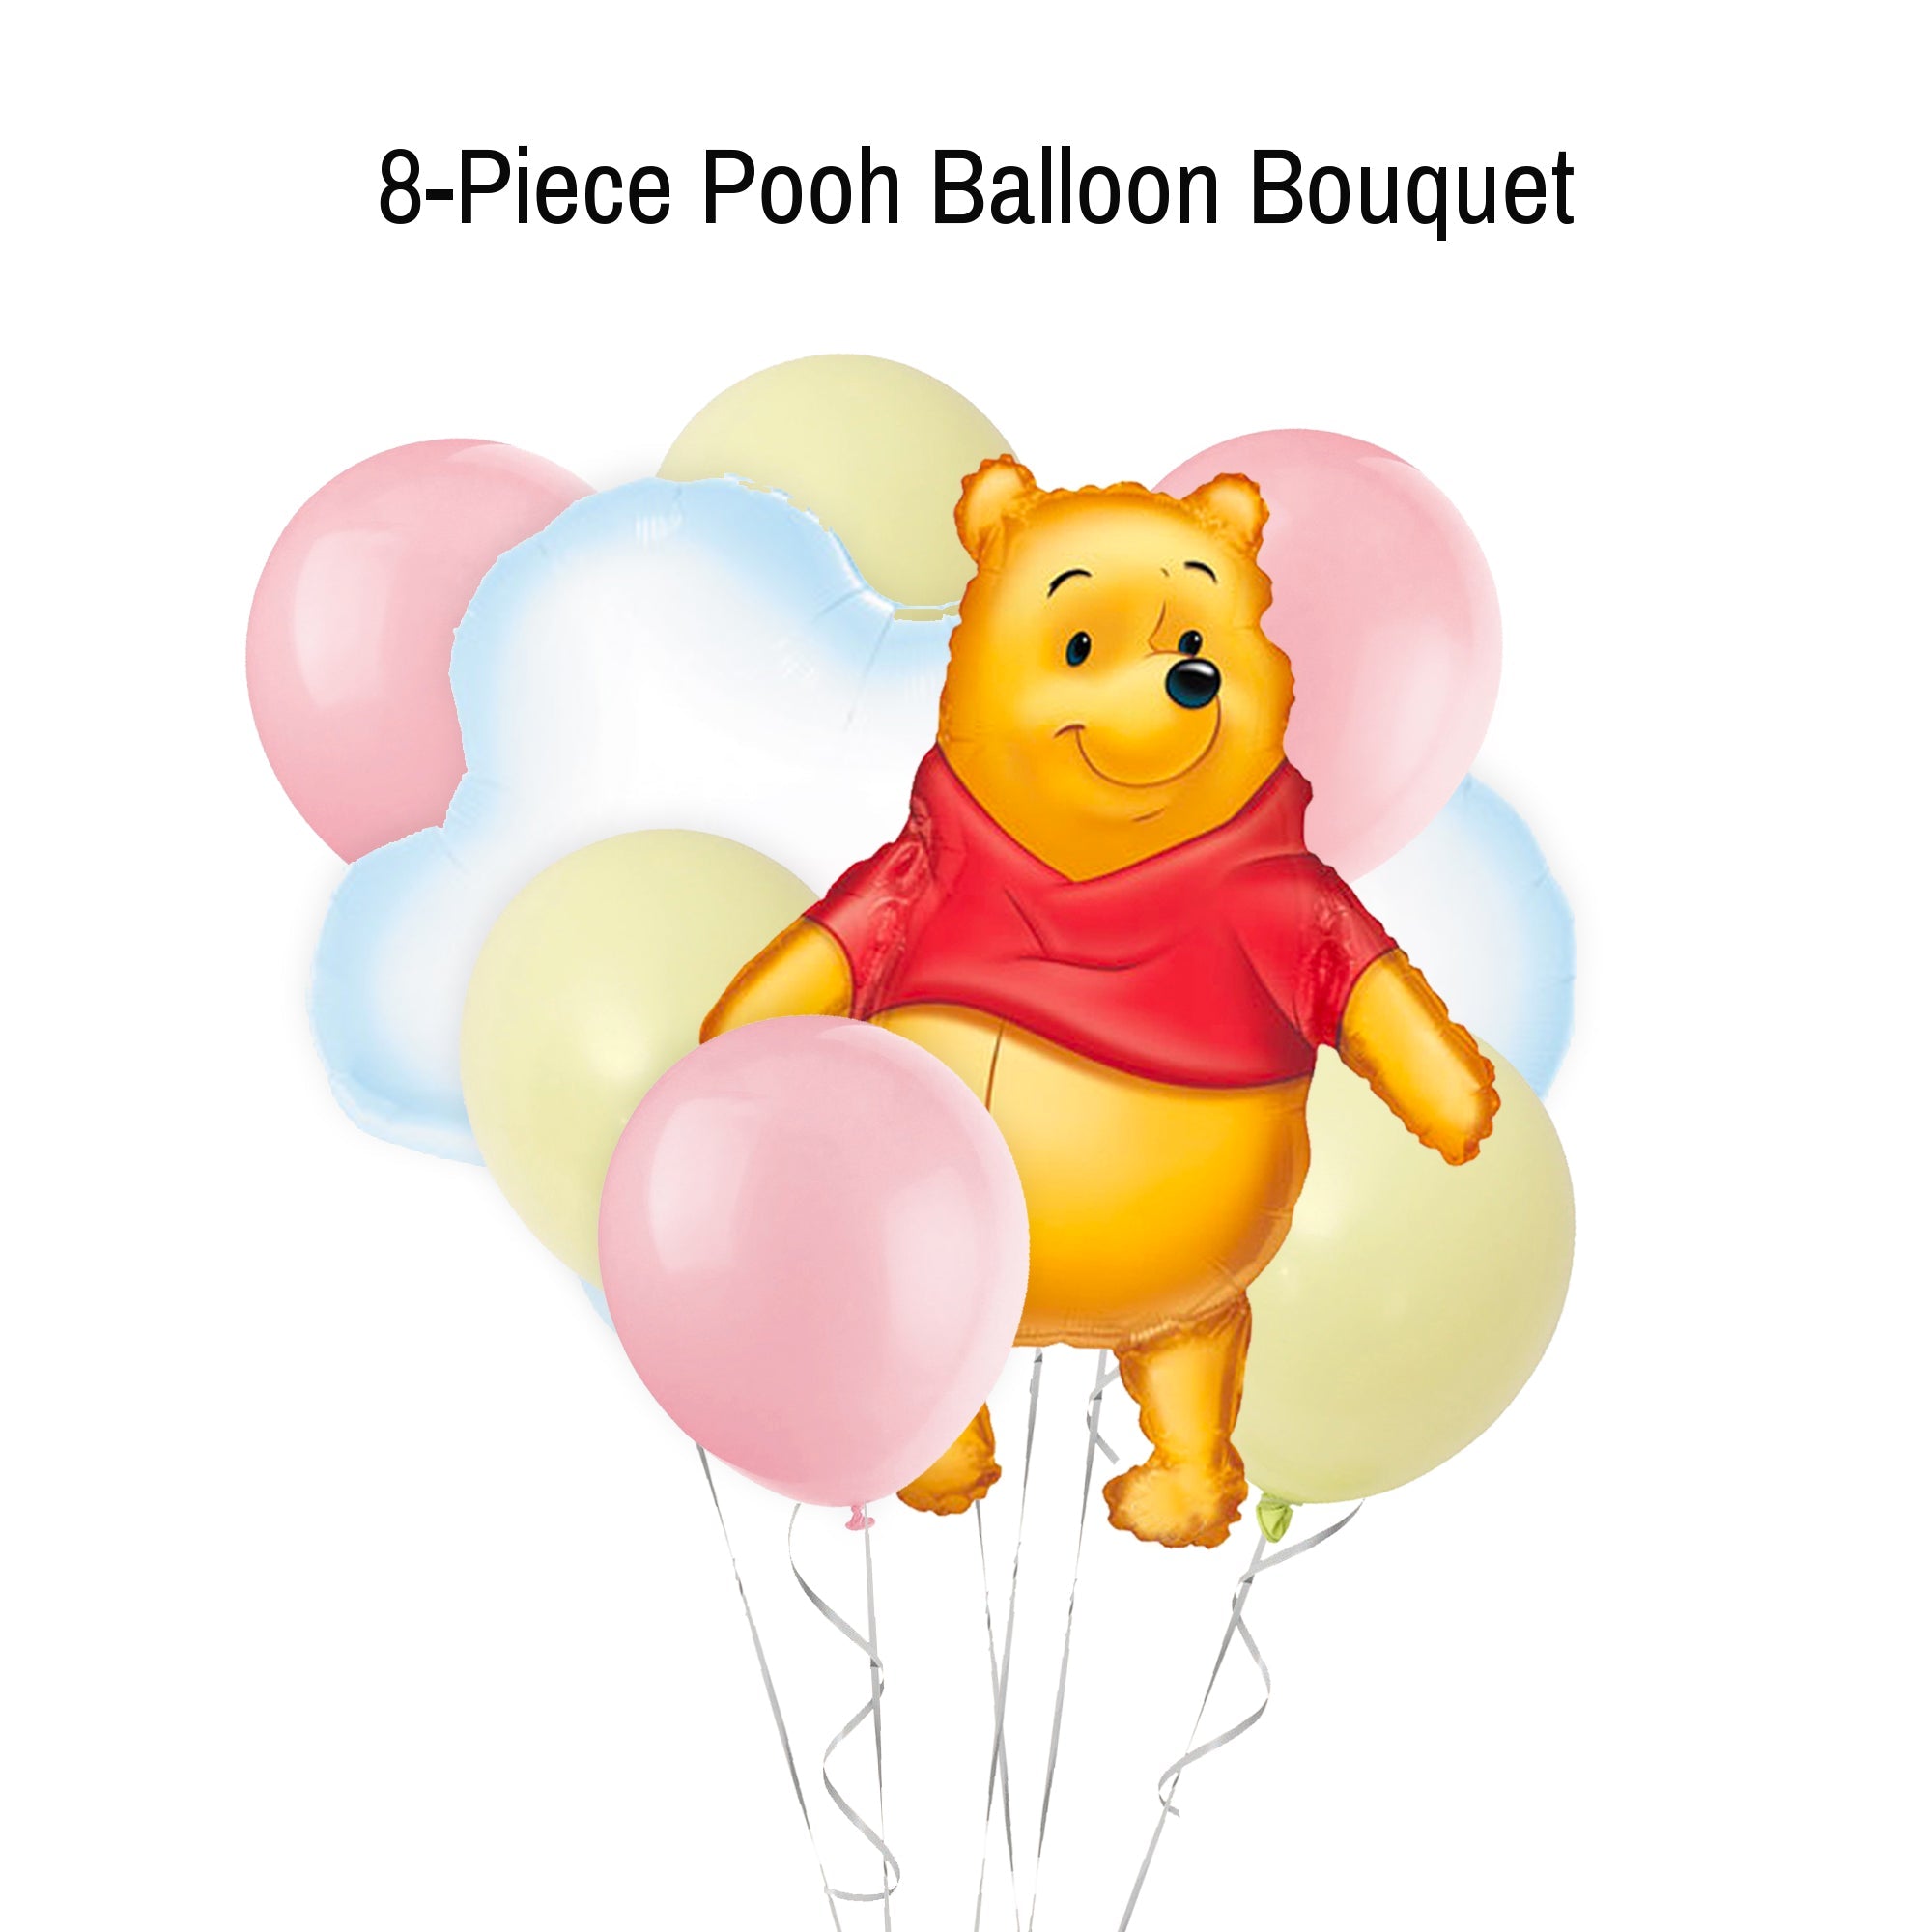 vod nabootsen Bermad Pink and Yellow Classic Pooh Balloon Bouquet from Ellie's Party Supply